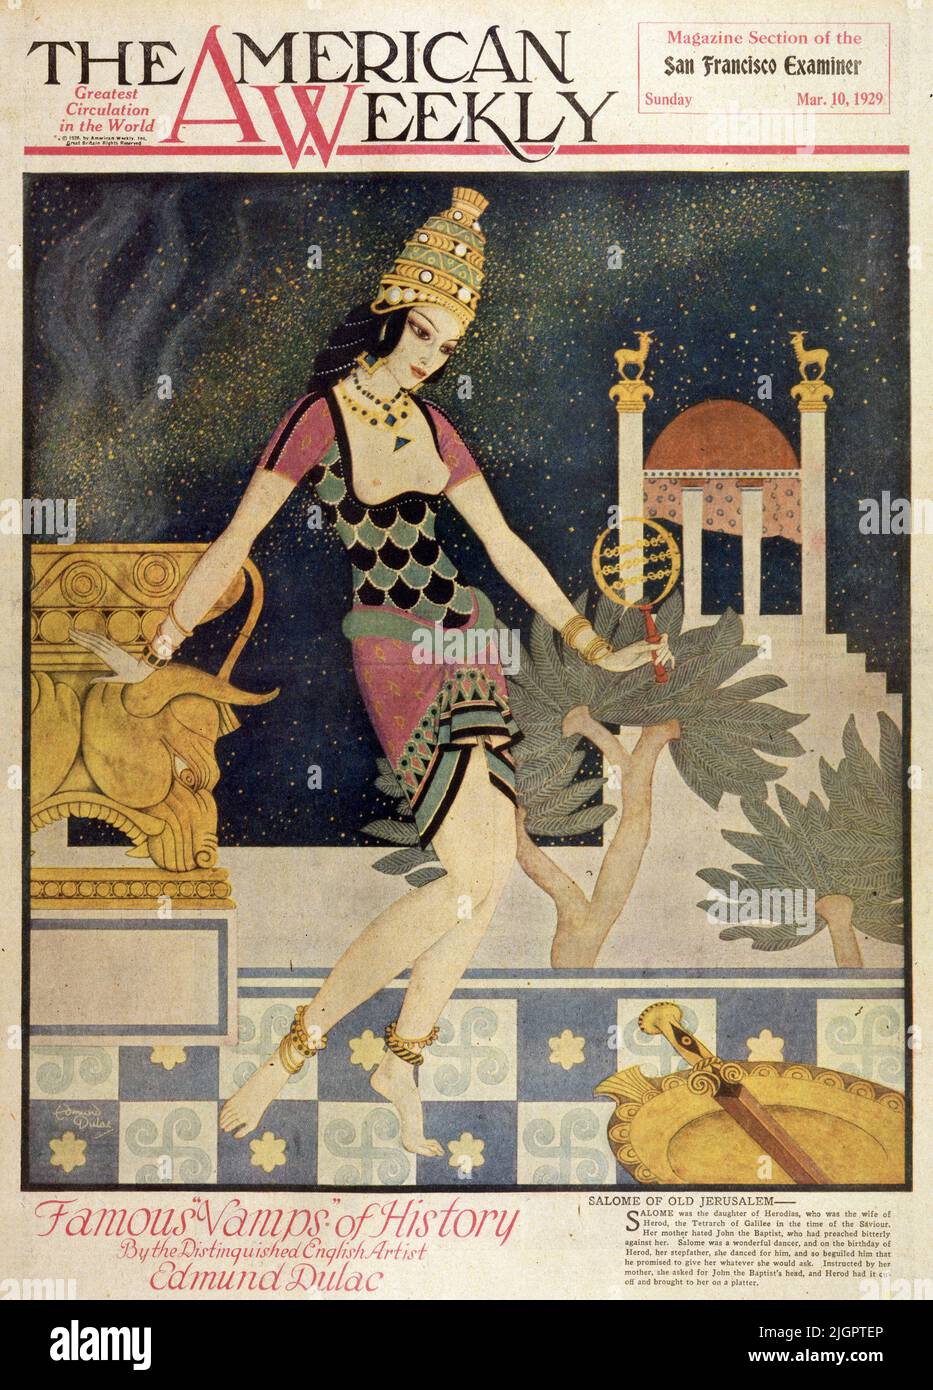 'Salome of Old Jerusalem' publish on March 10,1929 in the American Weekly Sunday magazine painted by Edmund Dulac.  Salome was the daughter of Herodias, who was the wife of Herod, the Tetrarch of Galilee in the time of the Saviour. Her mother hated John the Baptist, who had preached bitterly against her. Salome was a wonderful dancer, and on the birthday of Herod, her stepfather, she danced for him, and so beguiled him that he promised to give her whatever that she would ask. Instructed by her mother she asked for John the Baptist head, and Herod had it cut off and brought to her on a platter Stock Photo